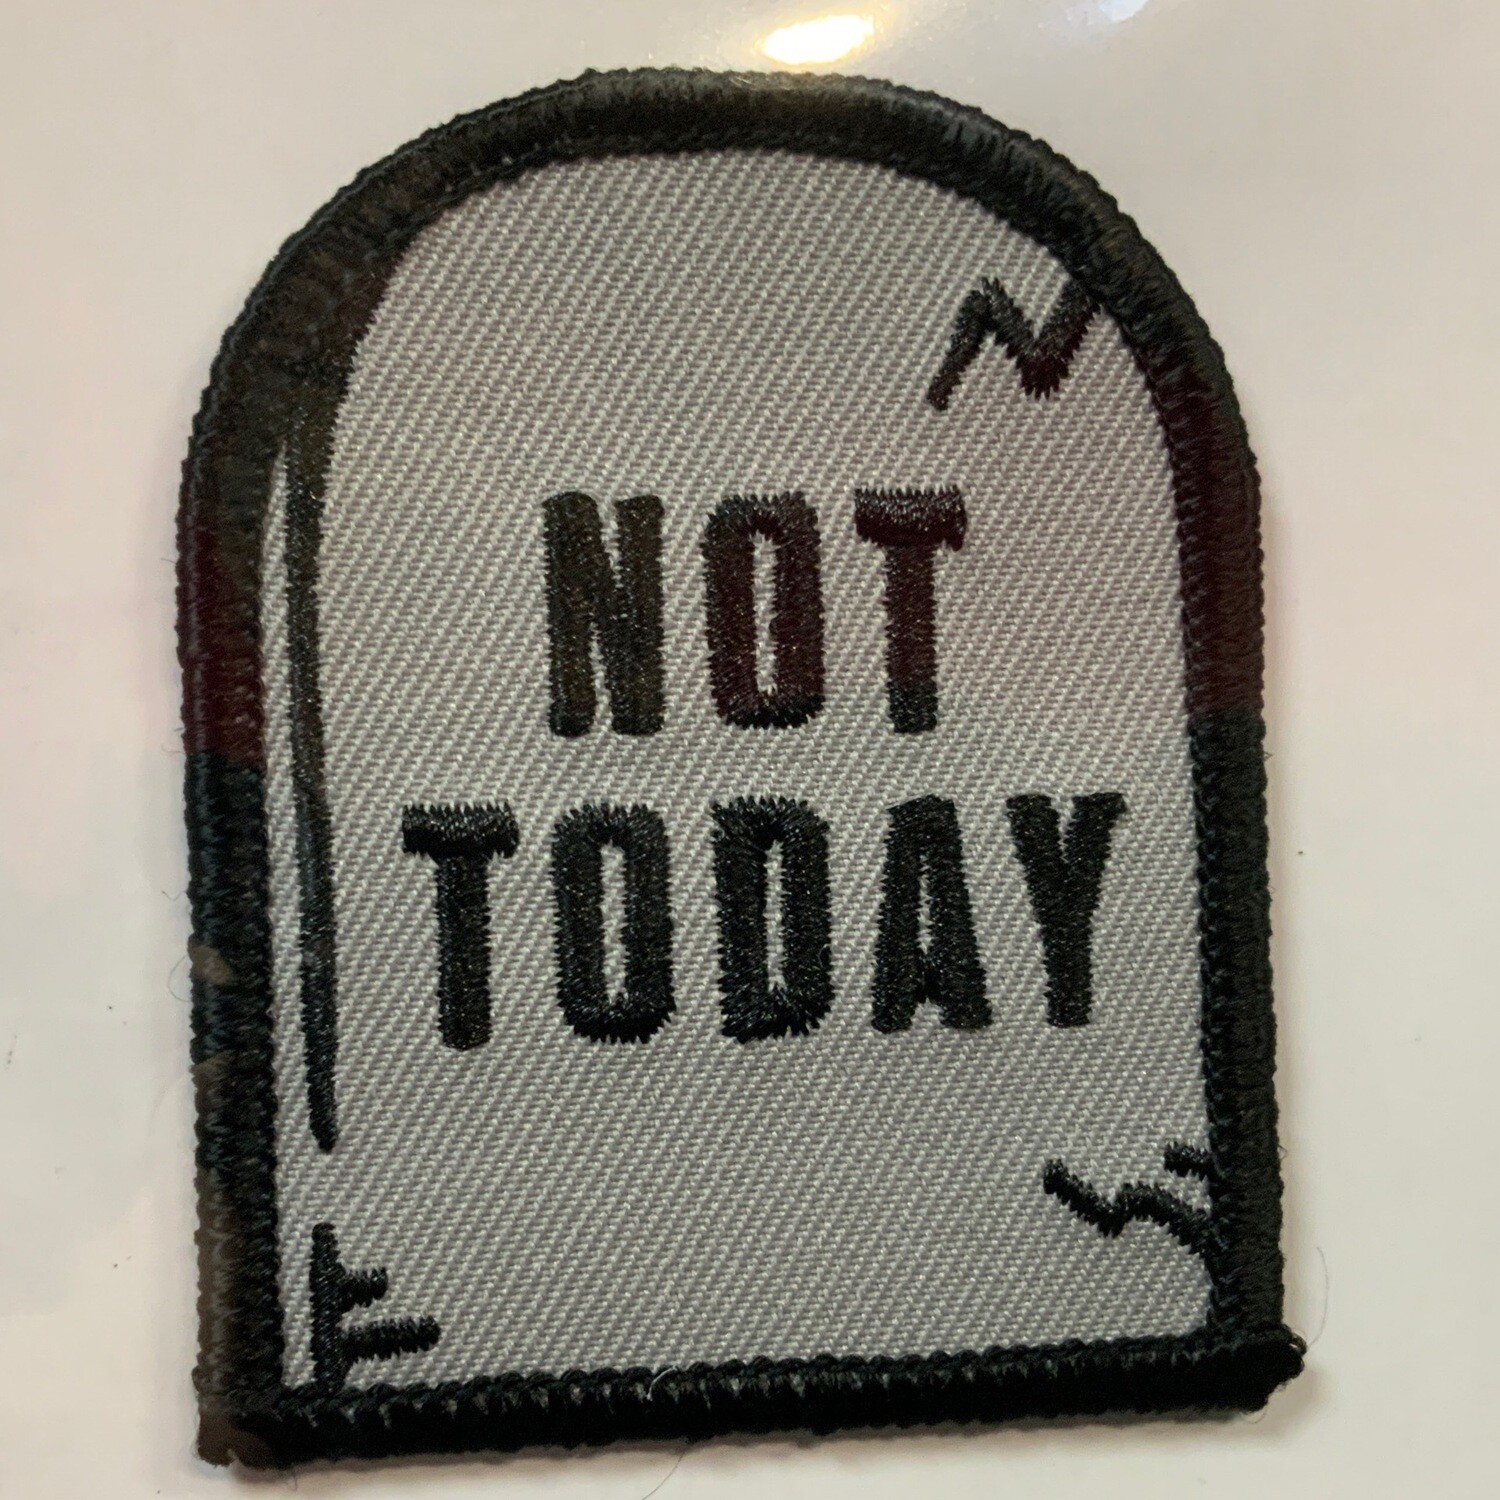 Not Today - Embroidered Patch from These Are Things